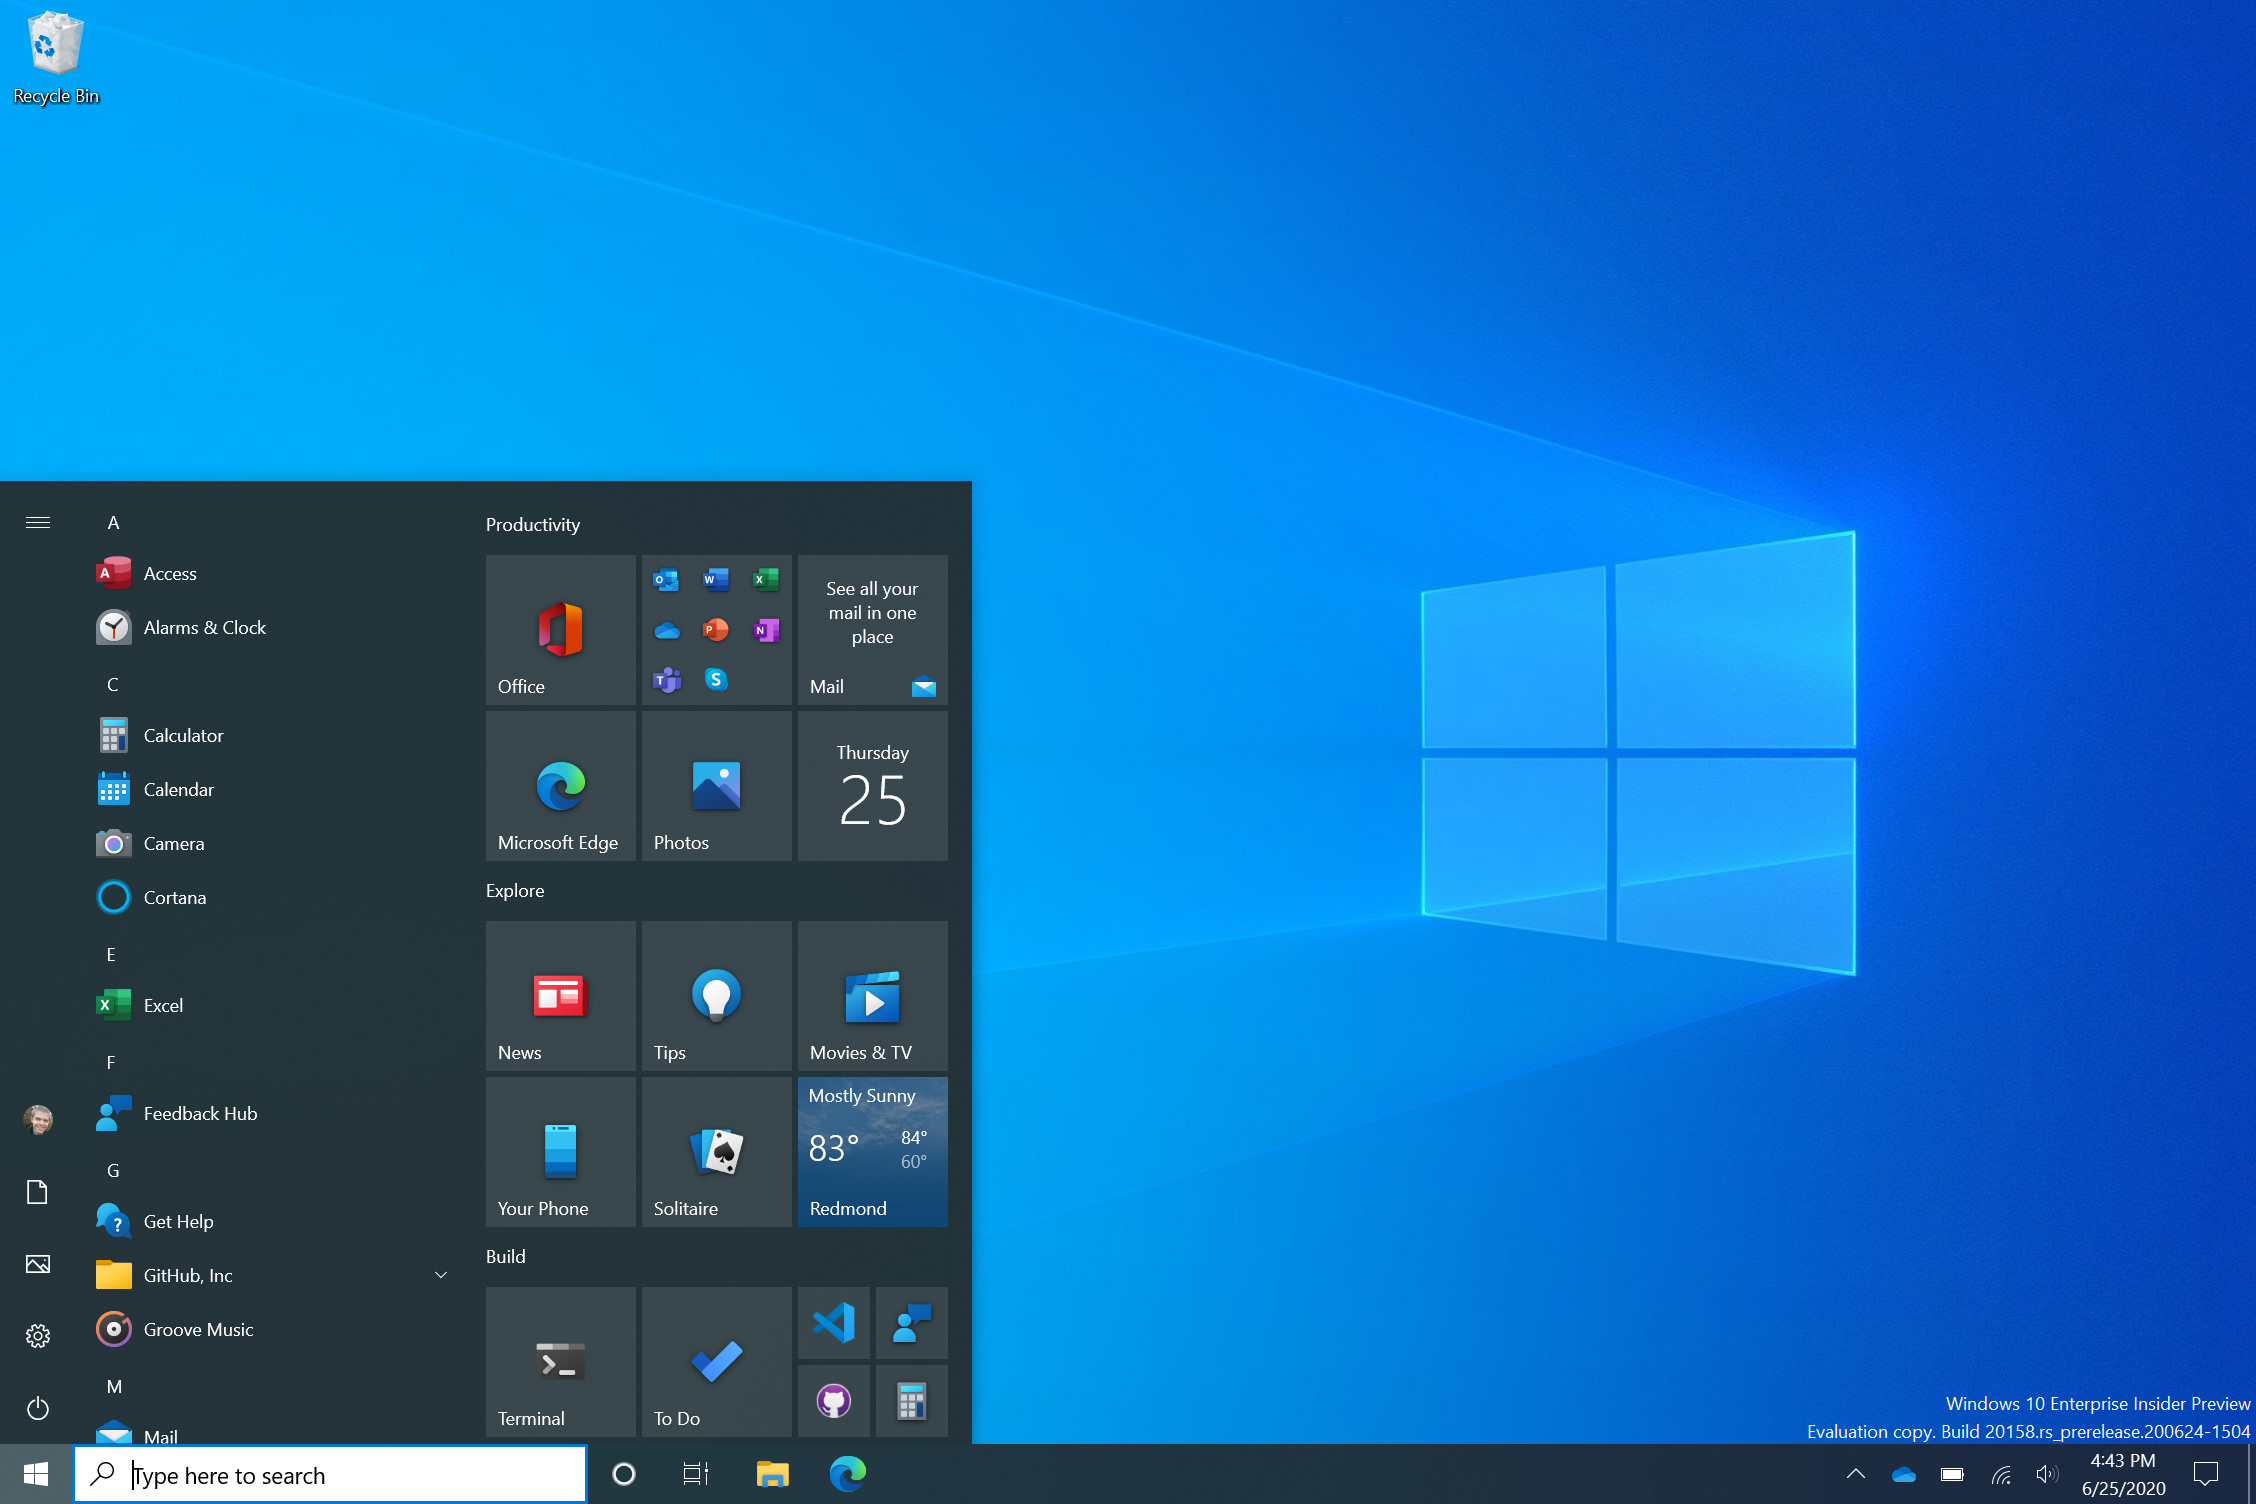 Windows 10 Update Alert: What Schools and Businesses Need to Know Before Time Runs Out